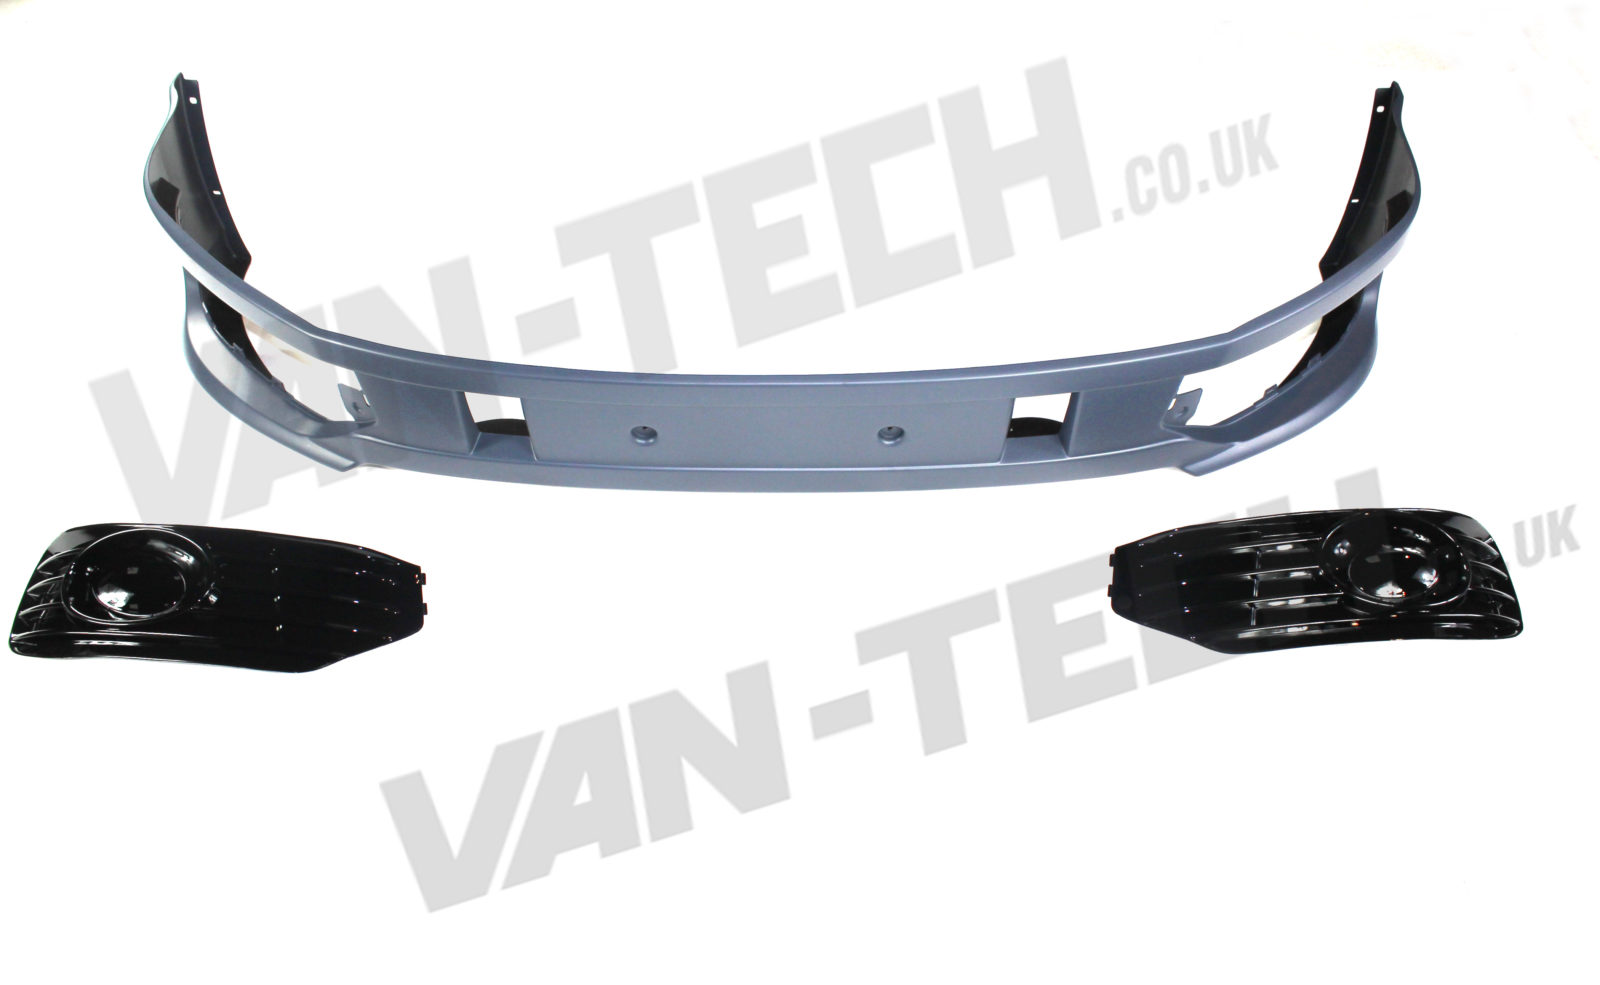 VW Transporter T5 Front End Conversion Styling Pack 3